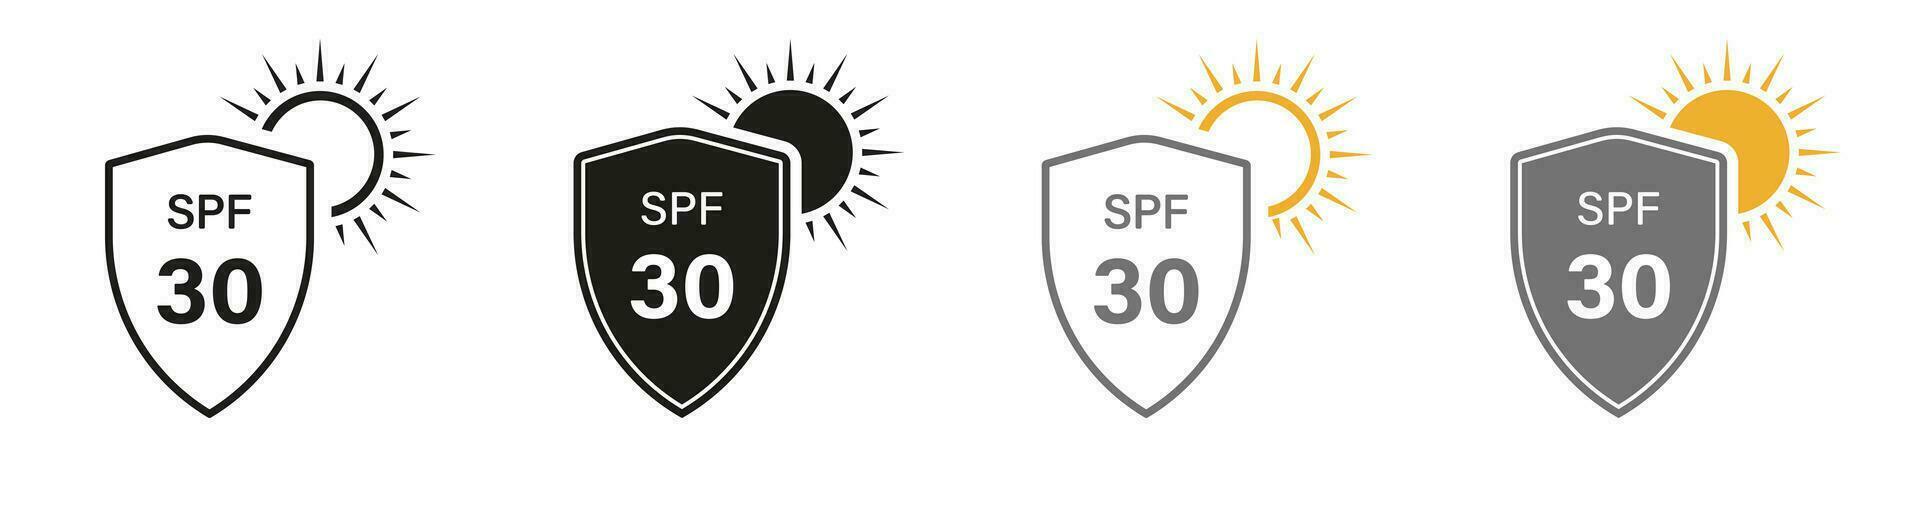 Sunblock SPF 30, Skin Protect Pictogram. Shield Block Ultraviolet Rays Symbol Collection. Sun Protection Line and Silhouette Icon Set. Summer Cream, Solar Safety Label. Isolated Vector Illustration.